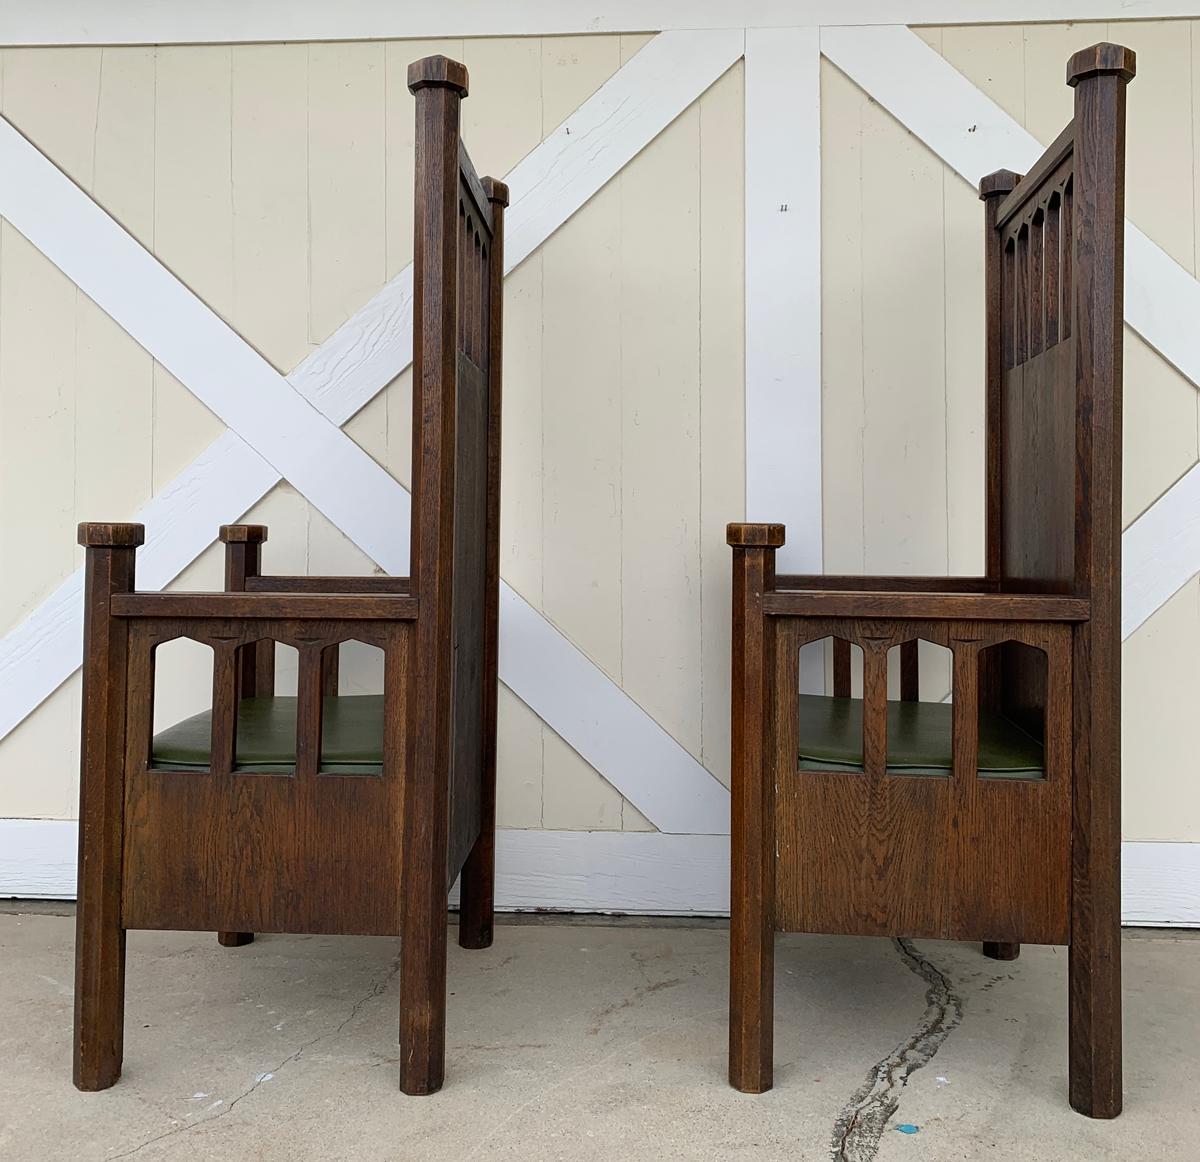 Extra tall arts and crafts armchairs from the late 1800s or early 1900s, build in solid wood, beautiful faceted pillars and finials, upholstered in green vinyl.

The chairs are solid, heavy and extremelly well built.

Measurements;
62 inches